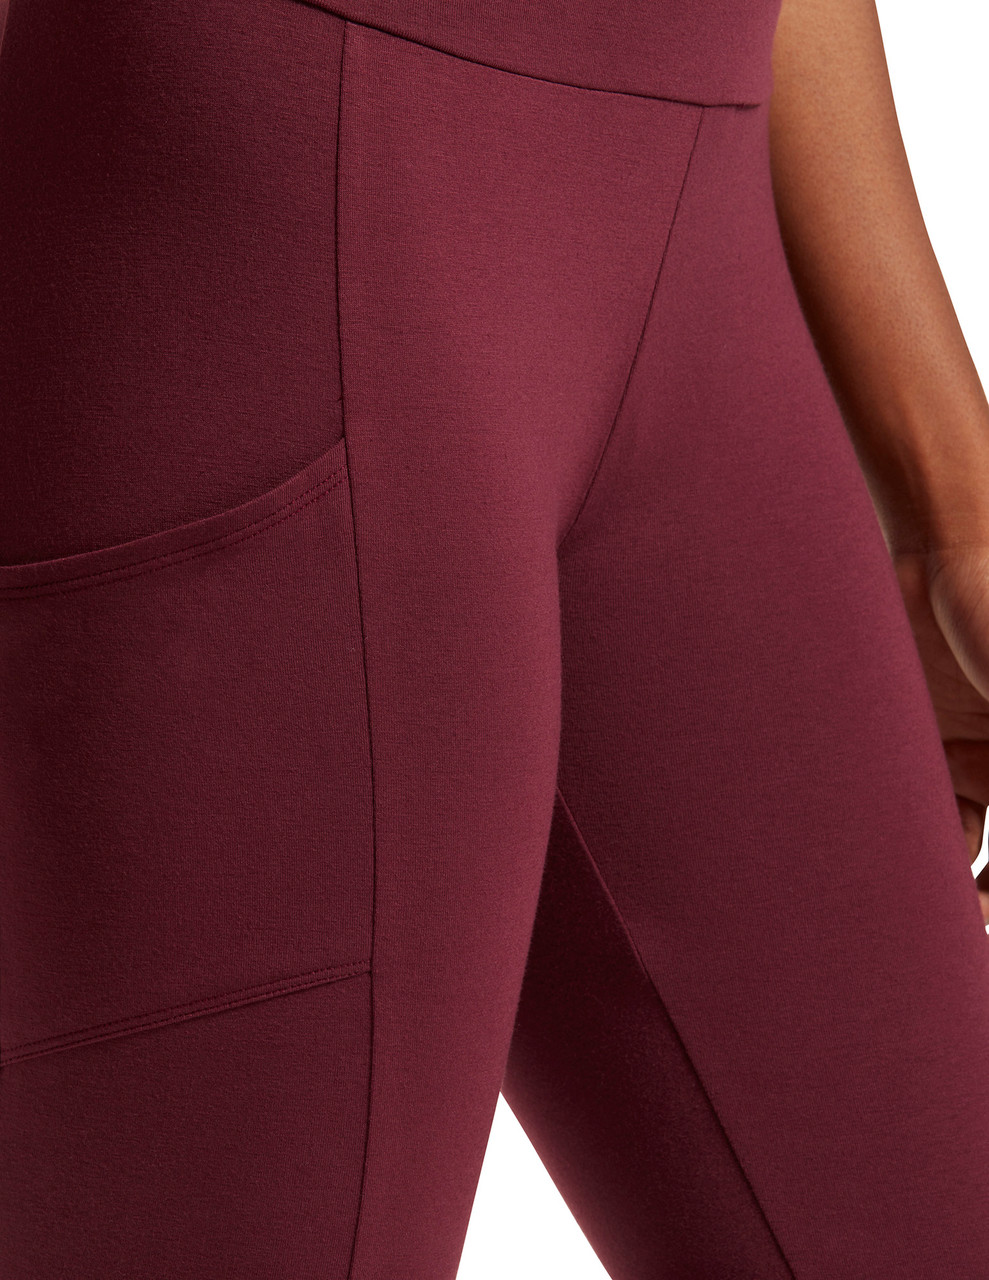 Cotton Leggings With Pockets